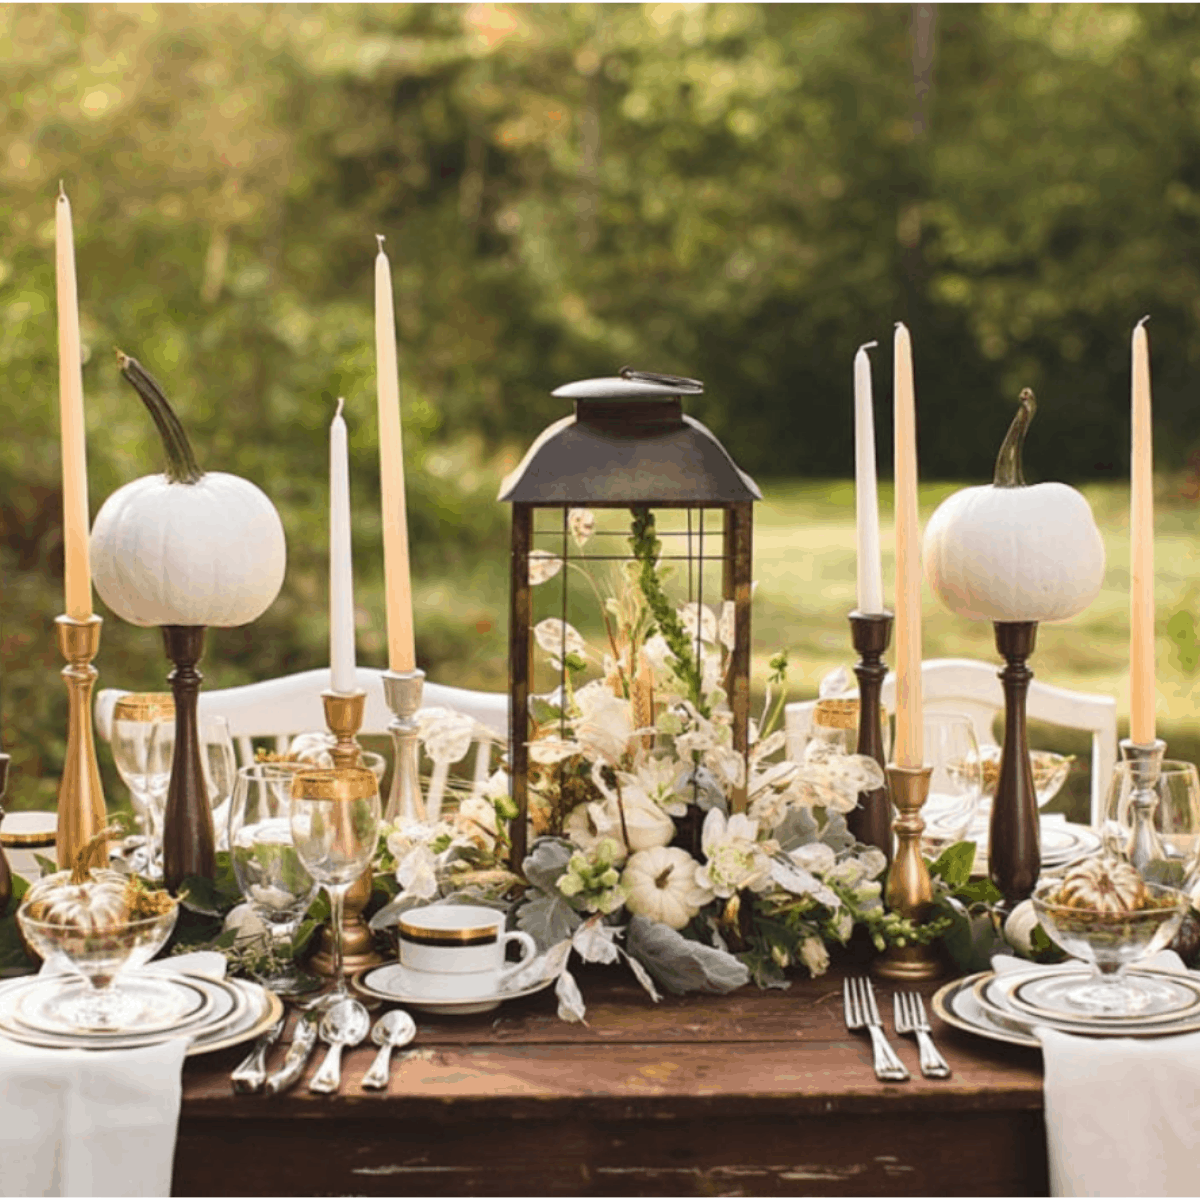 Thanksgiving table idea with green, cream and metallic candlesticks